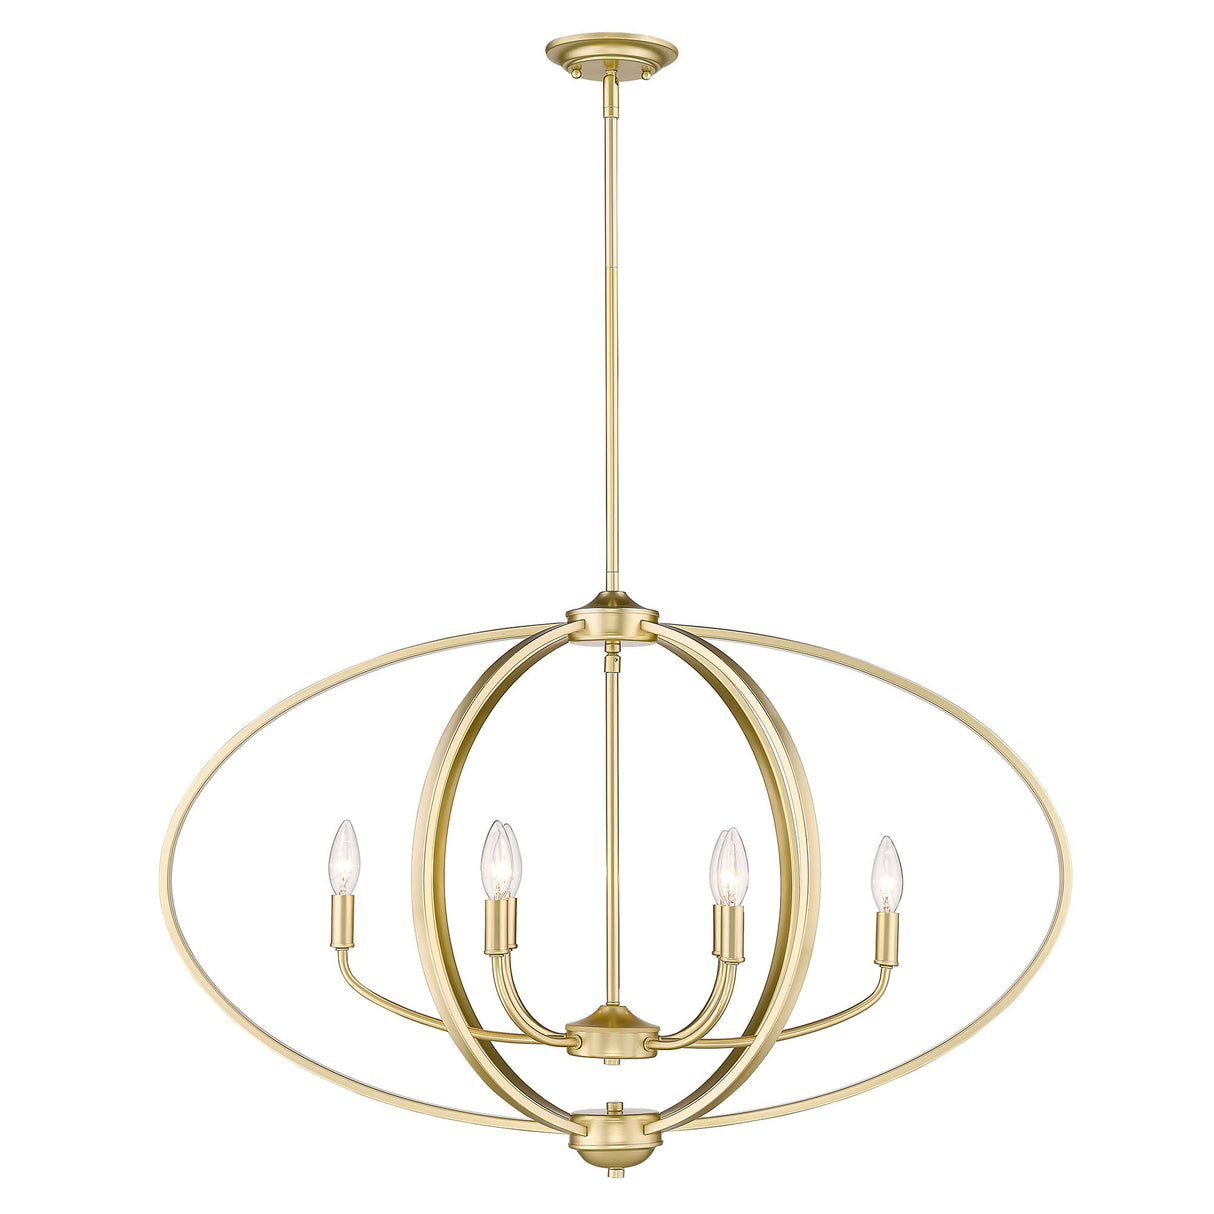 Colson OG Linear Pendant in Olympic Gold